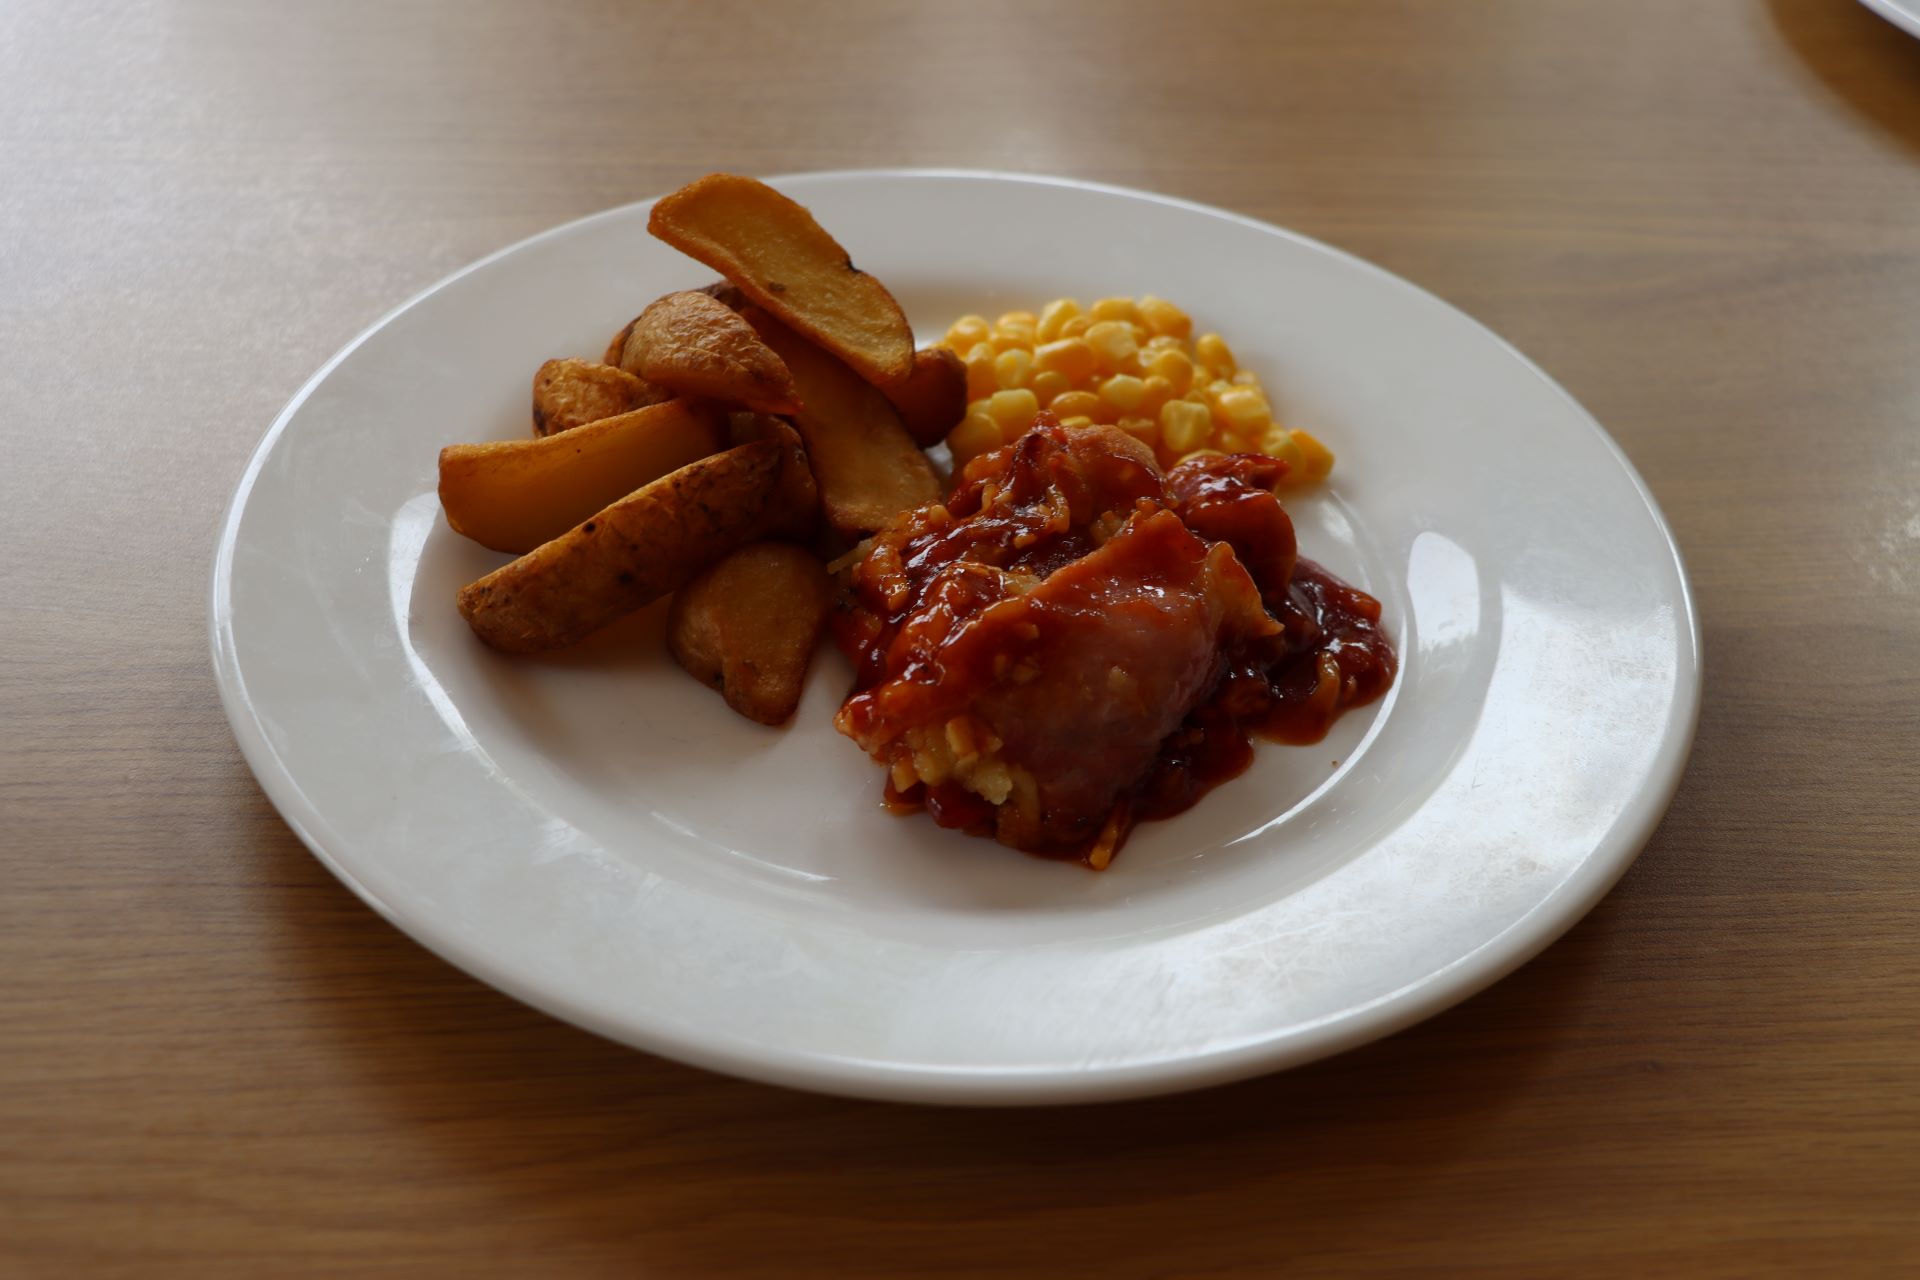 Hunter's Chicken with Jacket Wedges and Sweetcorn